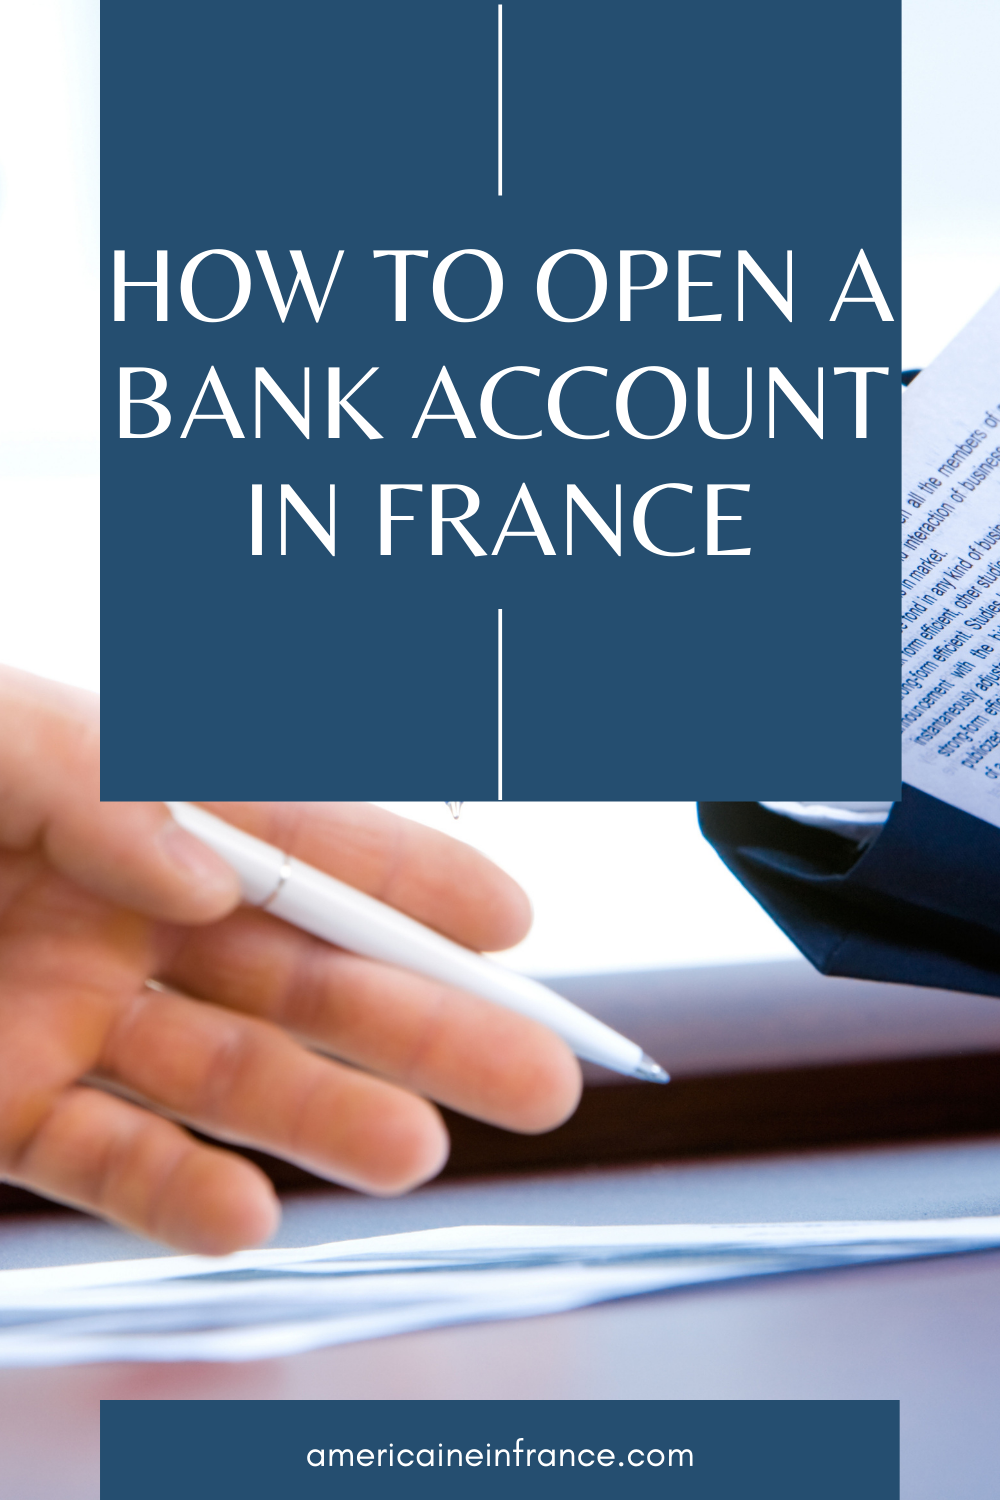 Open a bank account in France  APRZ - Accounting firm, Lyon & Paris